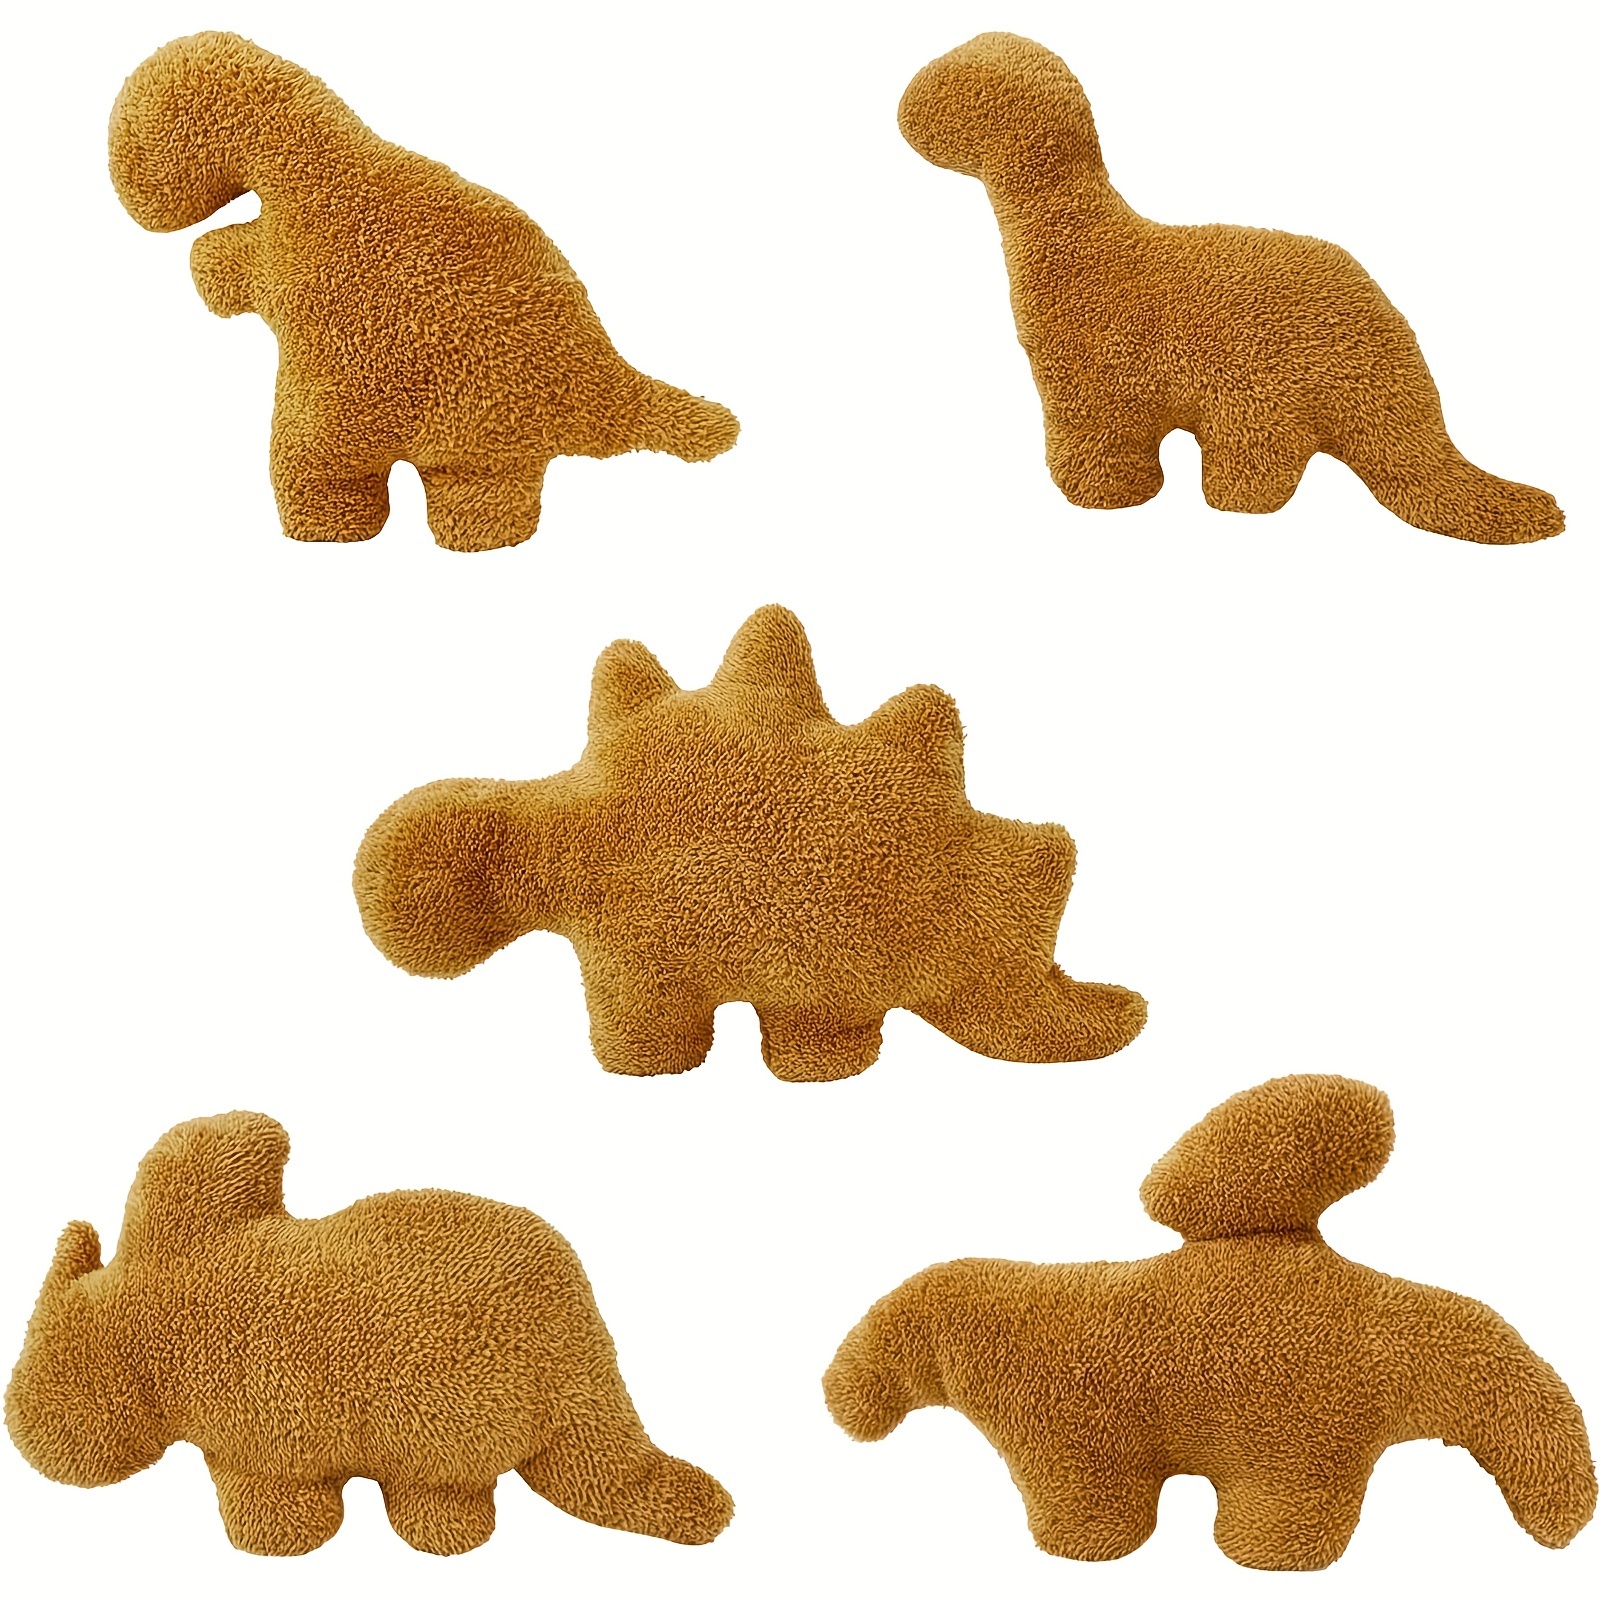 8 Style Dino And Chicken Nugget Plush Pillows Stegosaurus Plush Dinosaur Halloween Plush Christmas Gift Party Decoration Easter For Kids